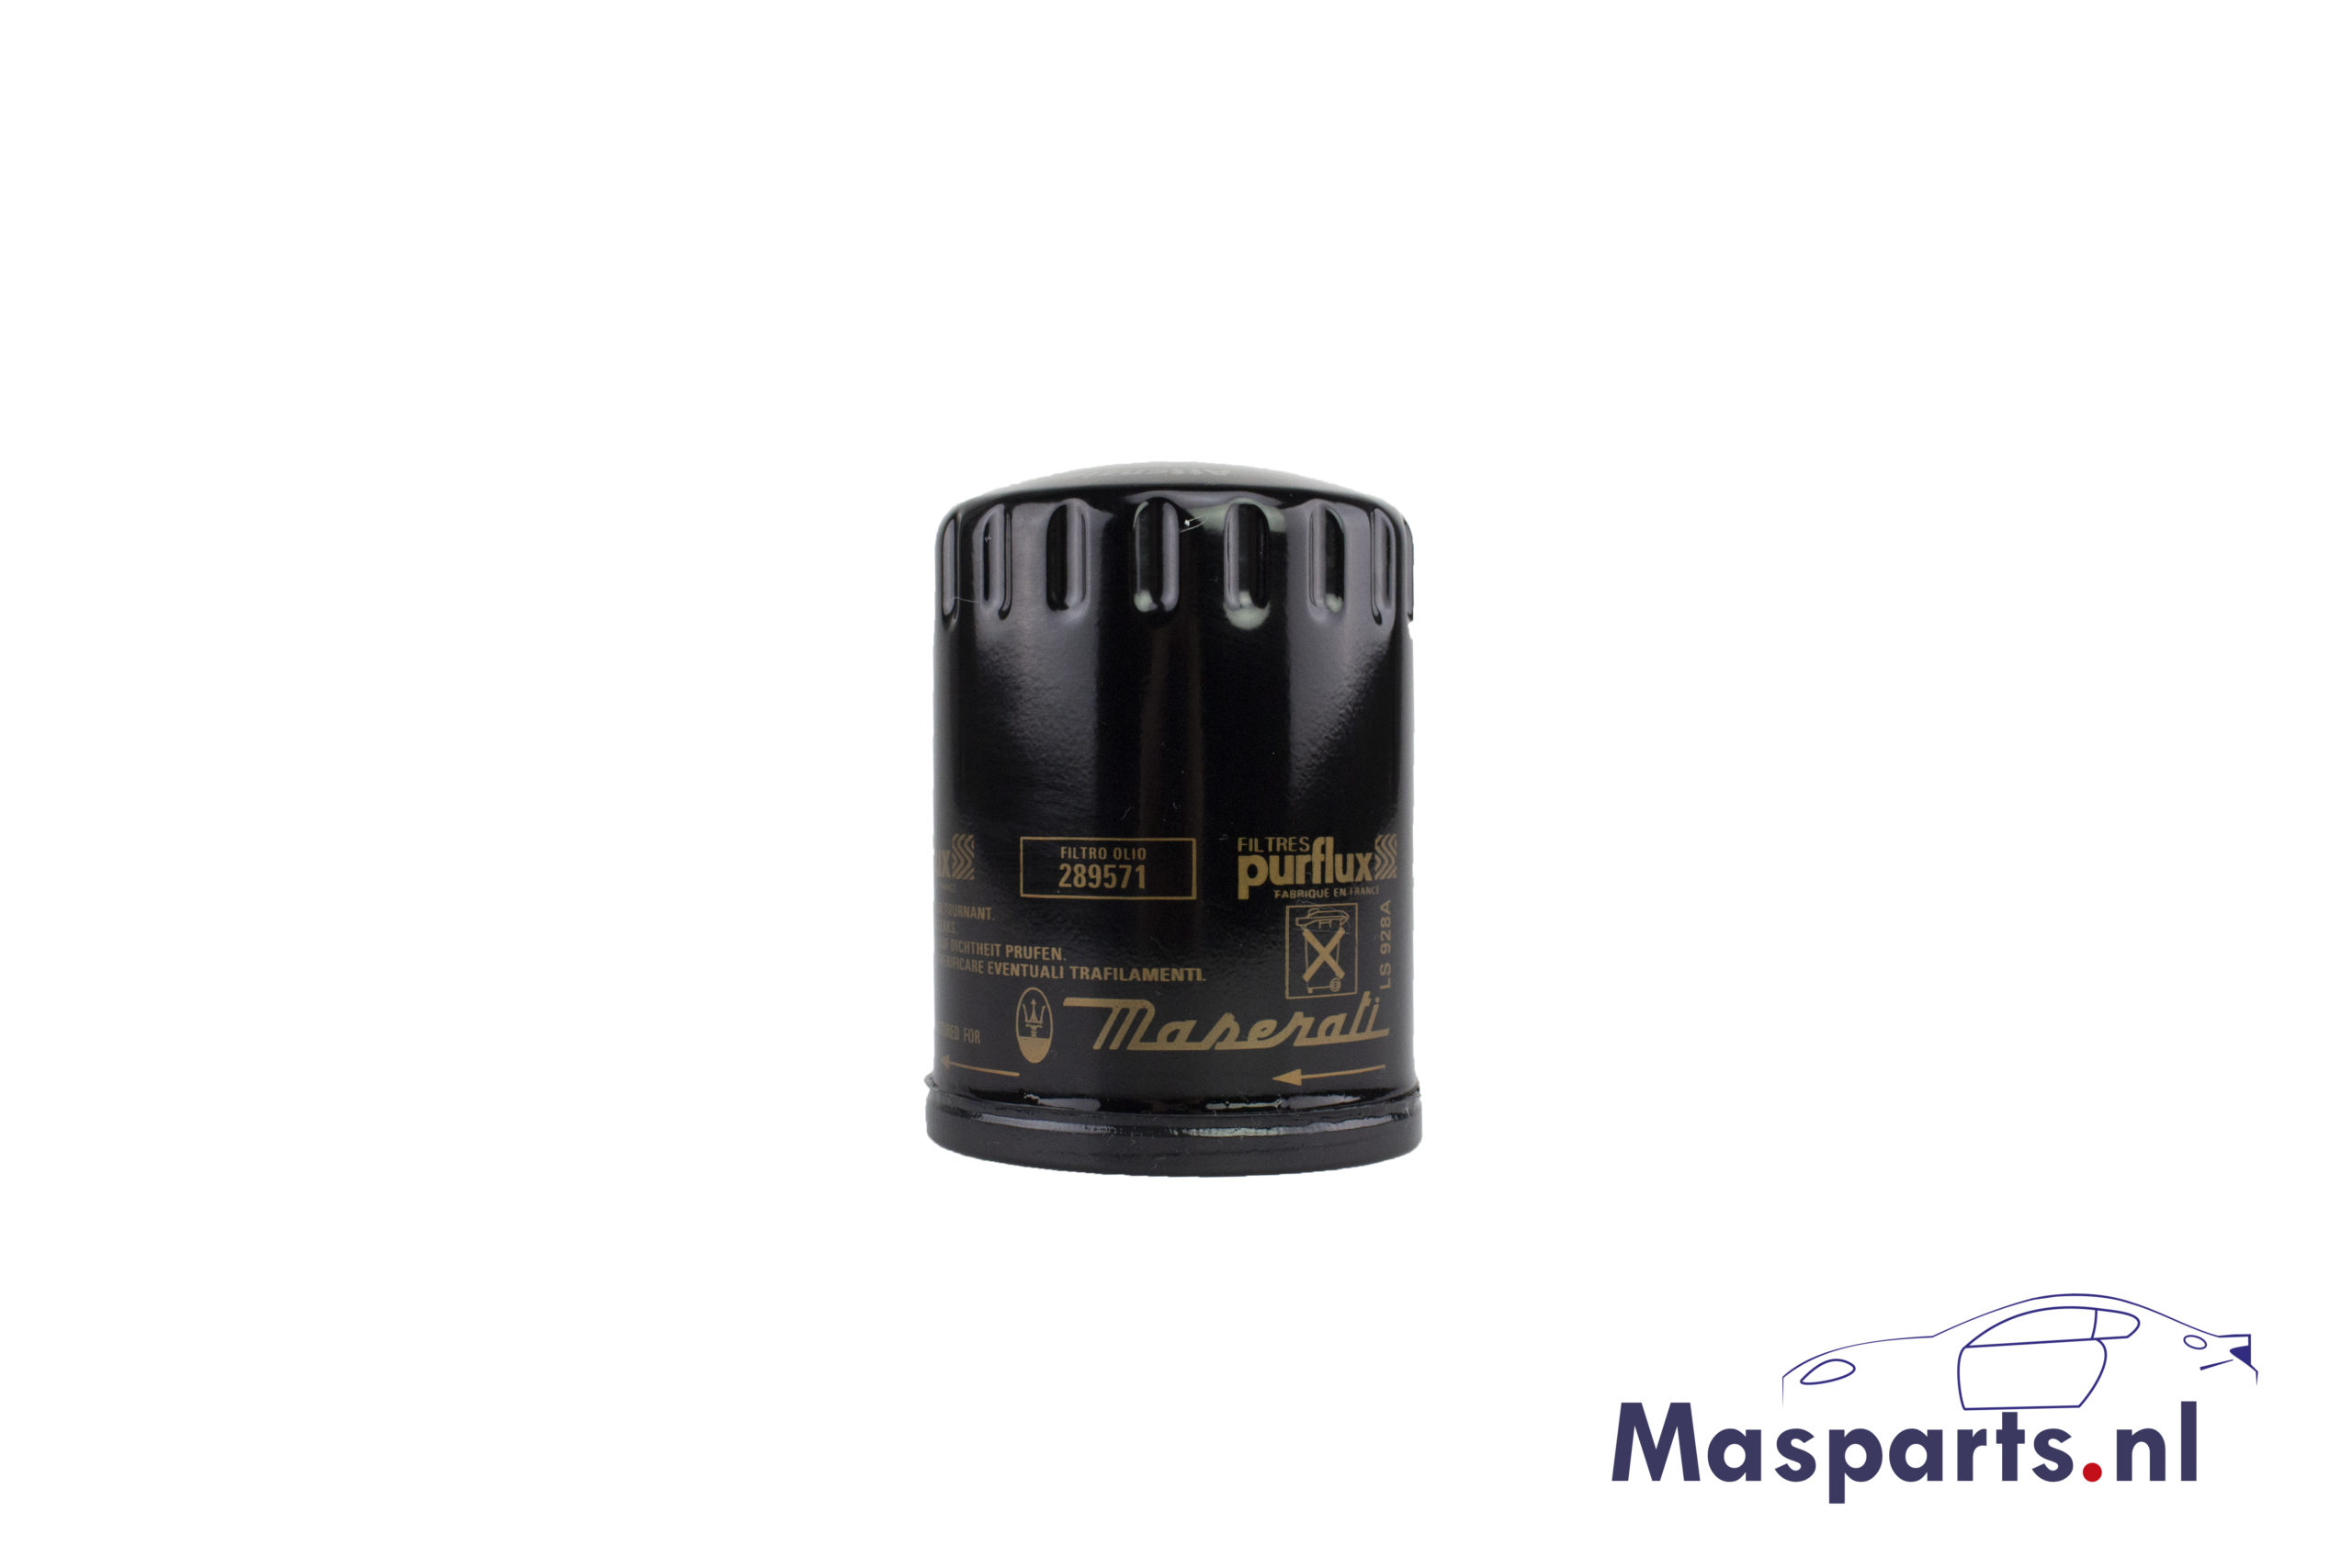 A Maserati oil filter with part number 289571.